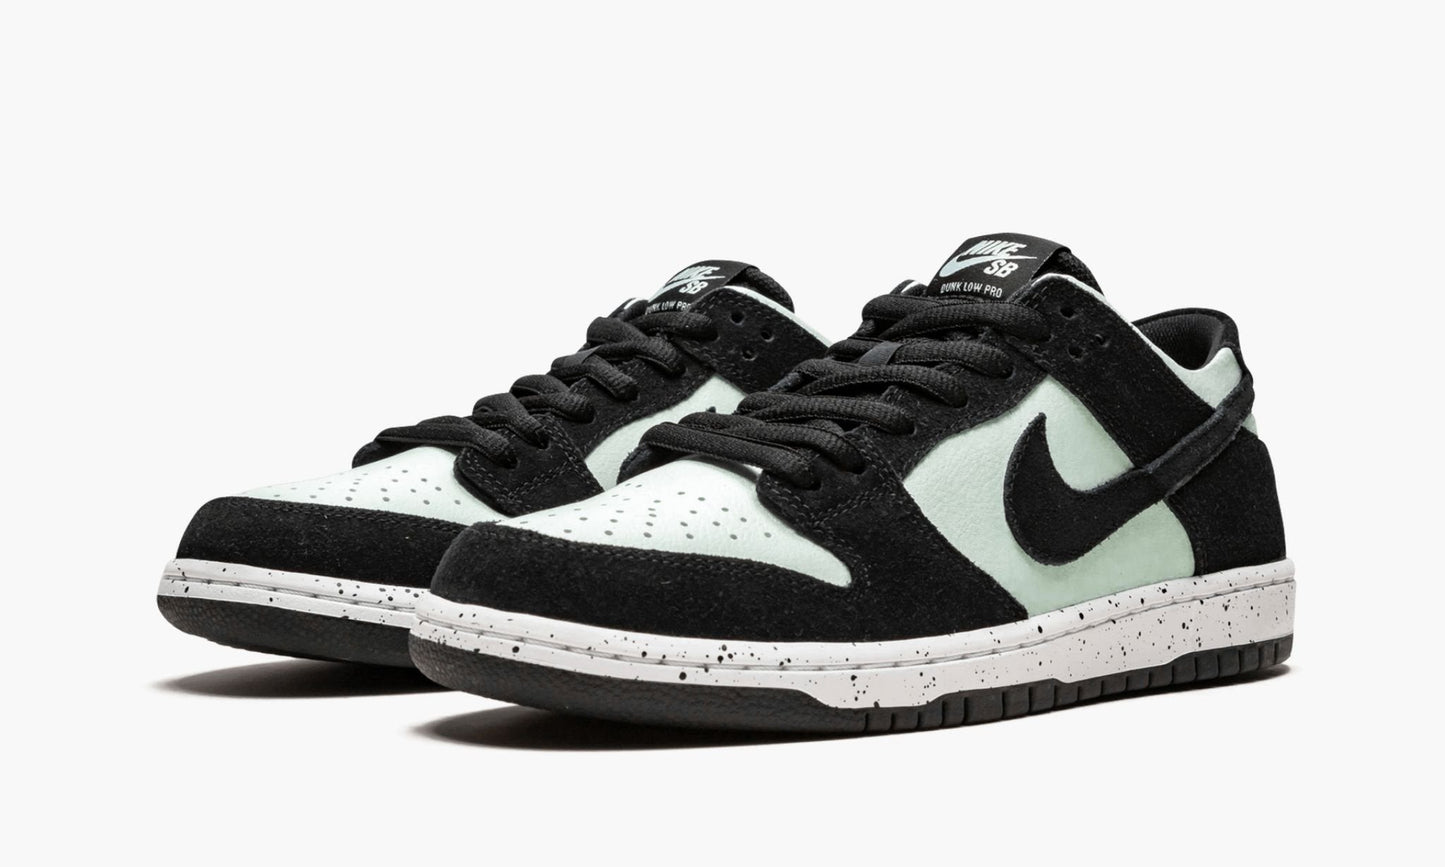 SB Zoom Dunk Low Pro "Barely Green"